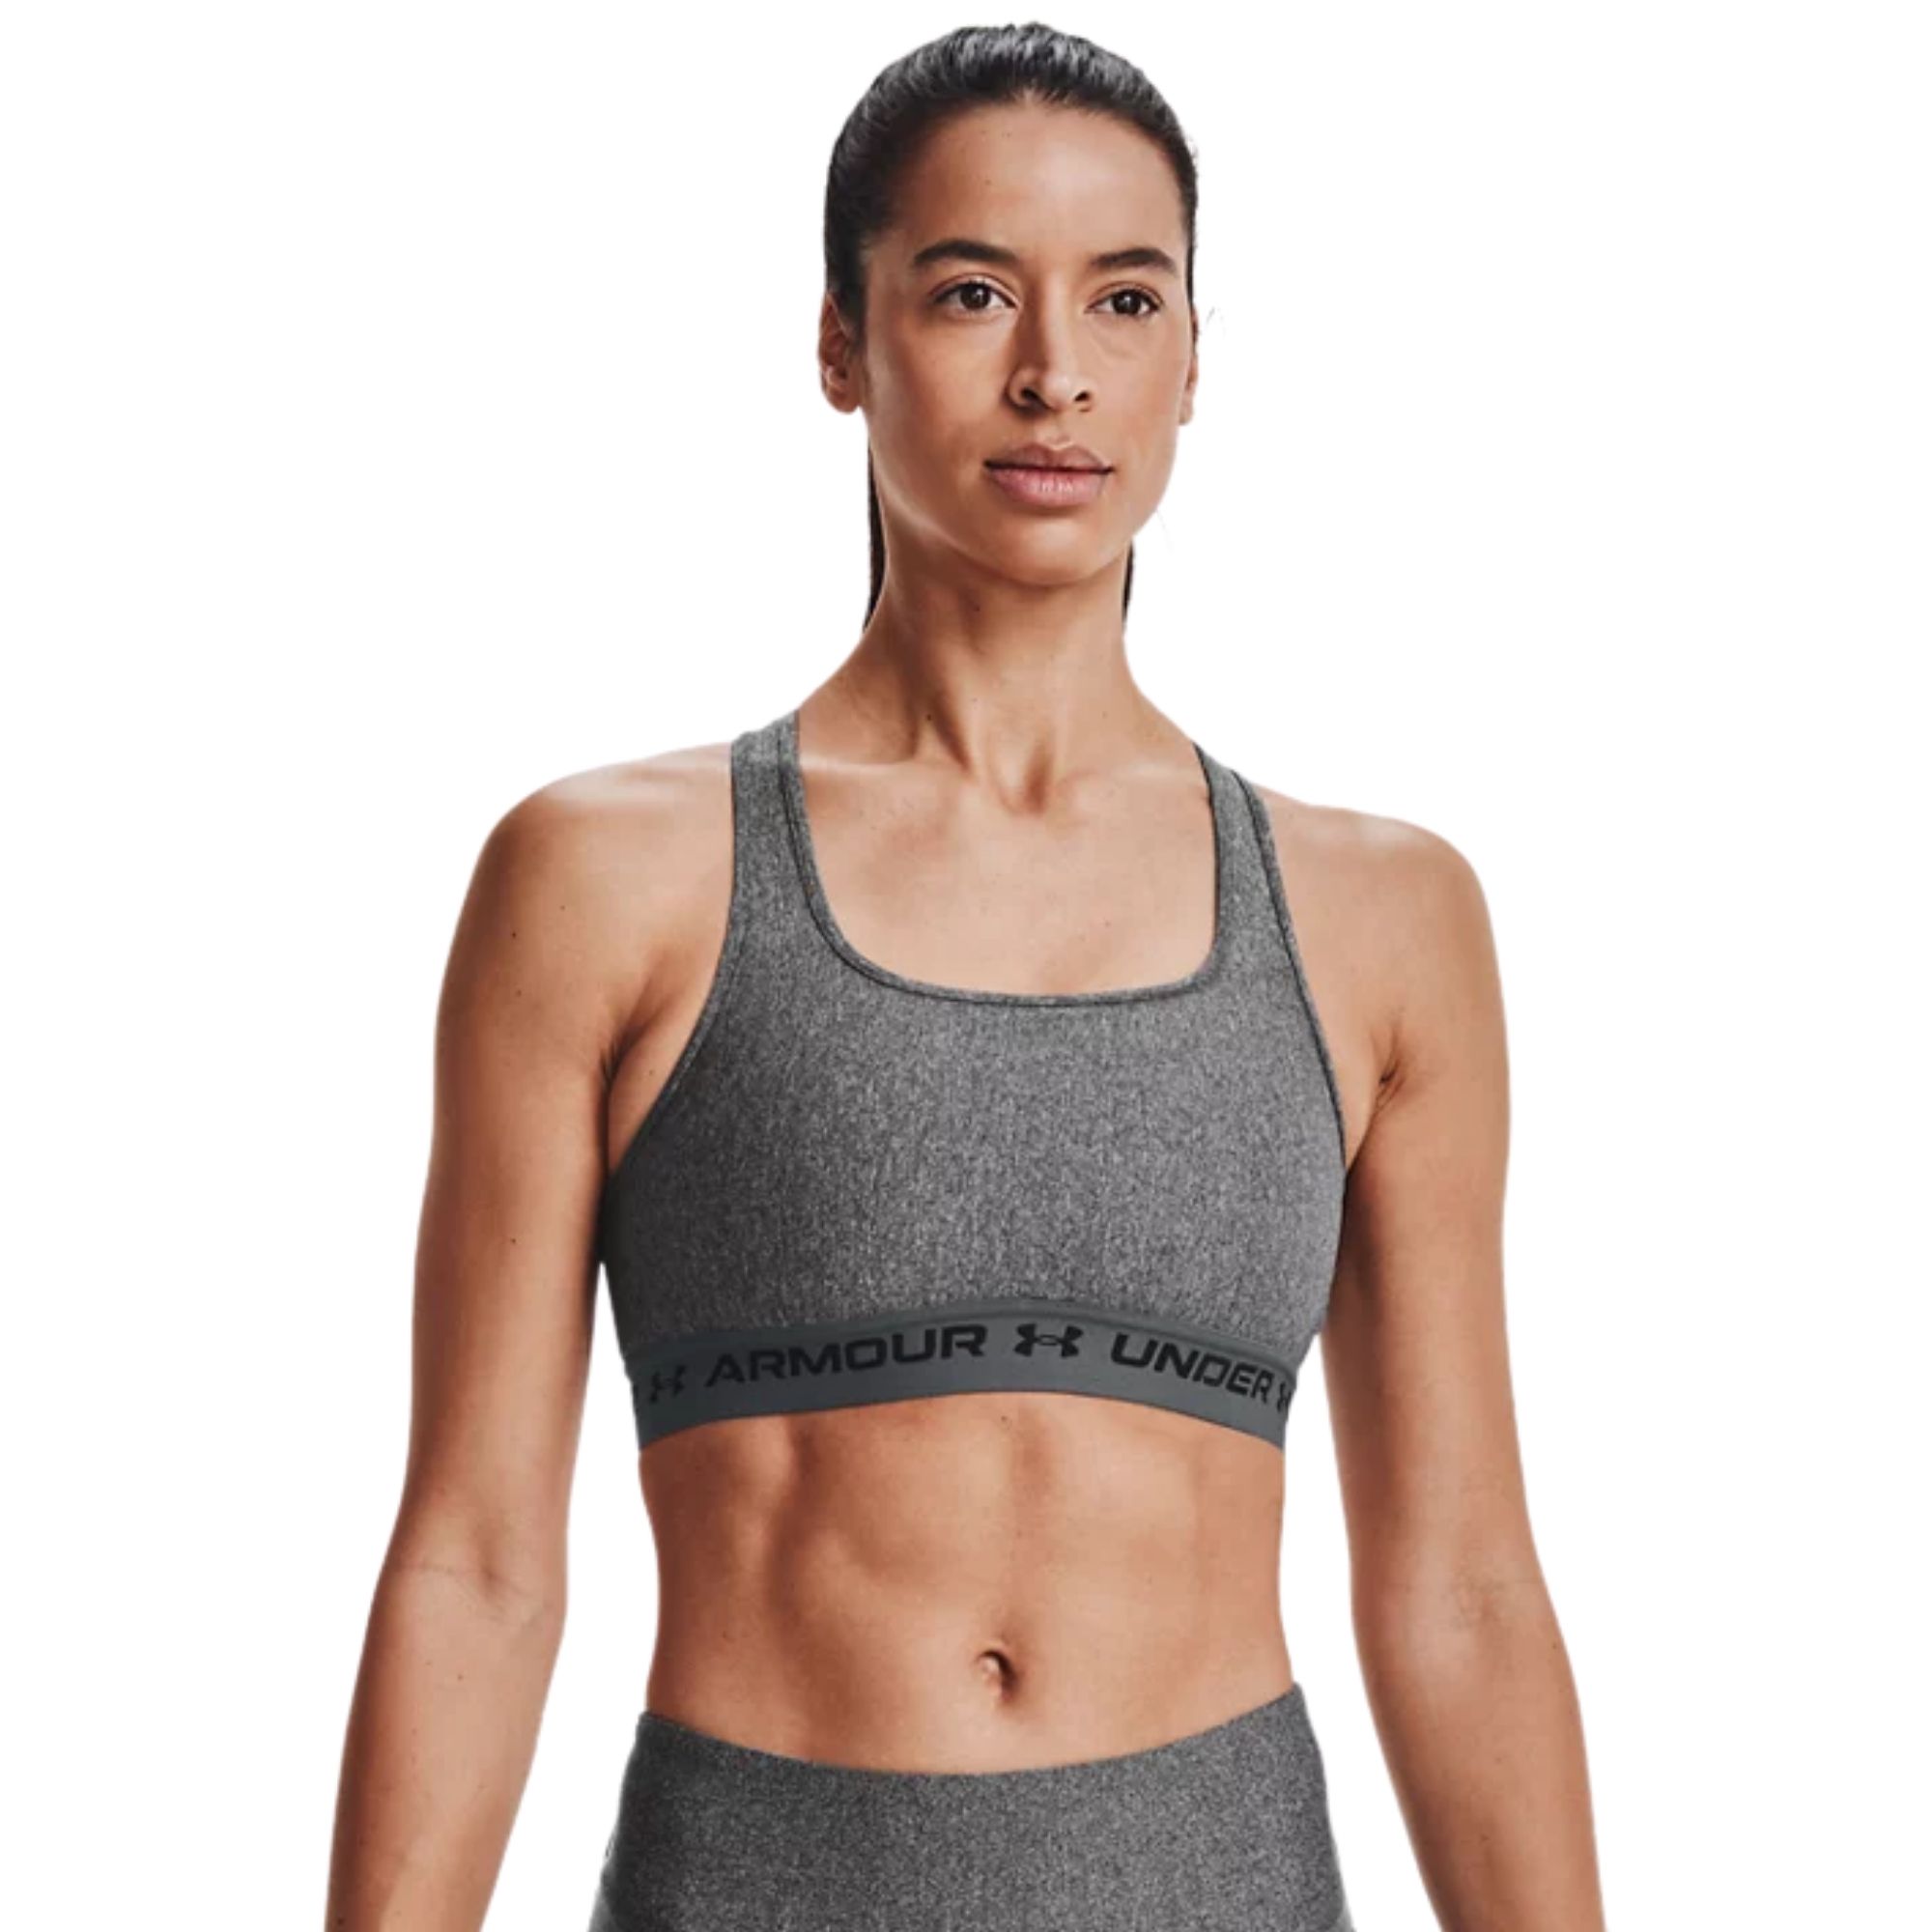 Under Armour Women's Sports Bra Small Gray Blue Striped Pullover Running